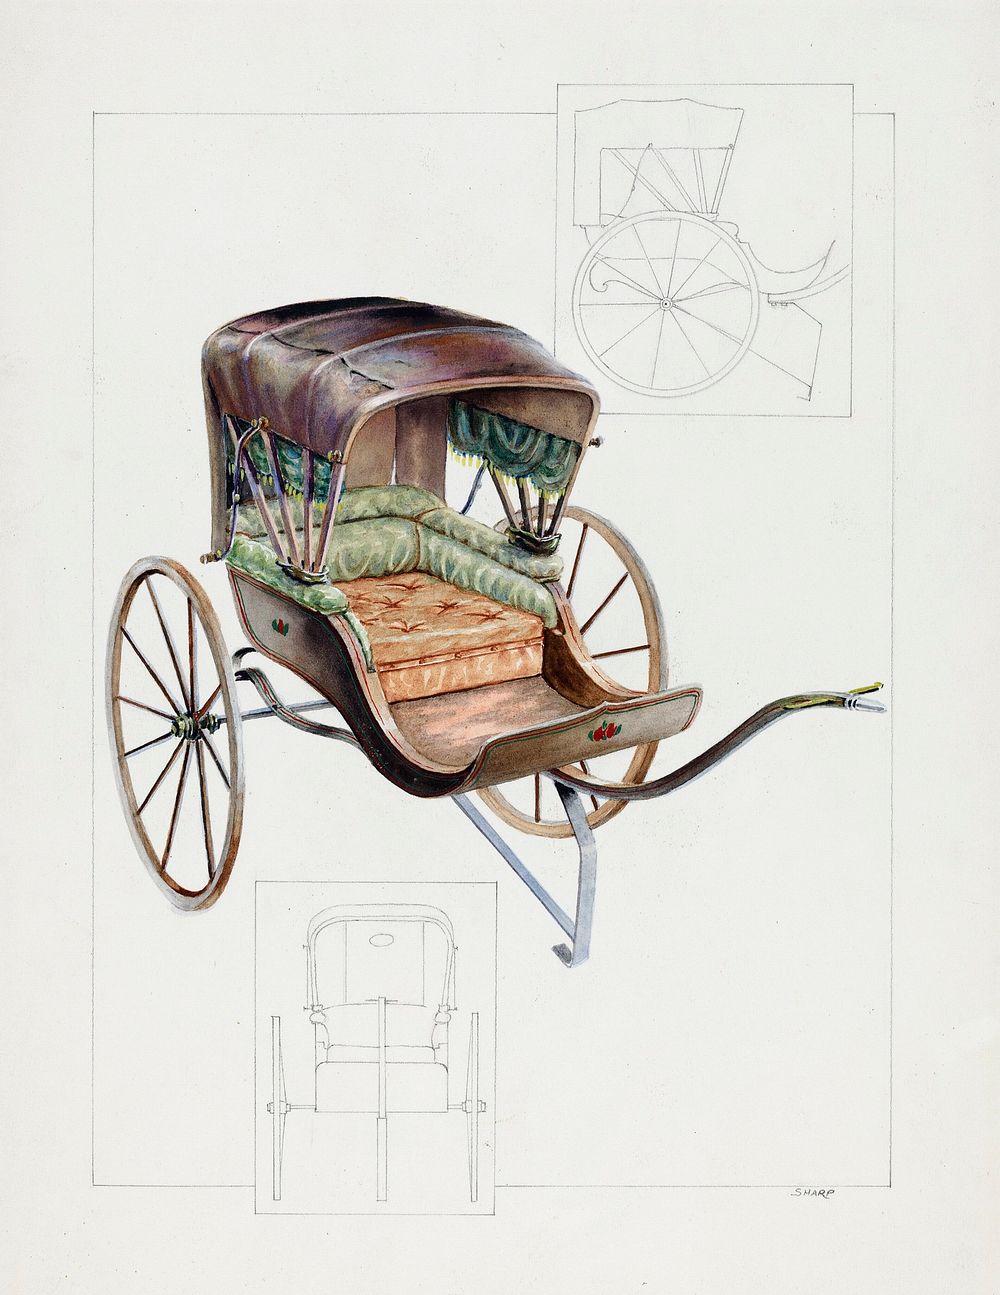 Baby Buggy (ca.1937) by Floyd R. Sharp. Original from The National Gallery of Art. Digitally enhanced by rawpixel.